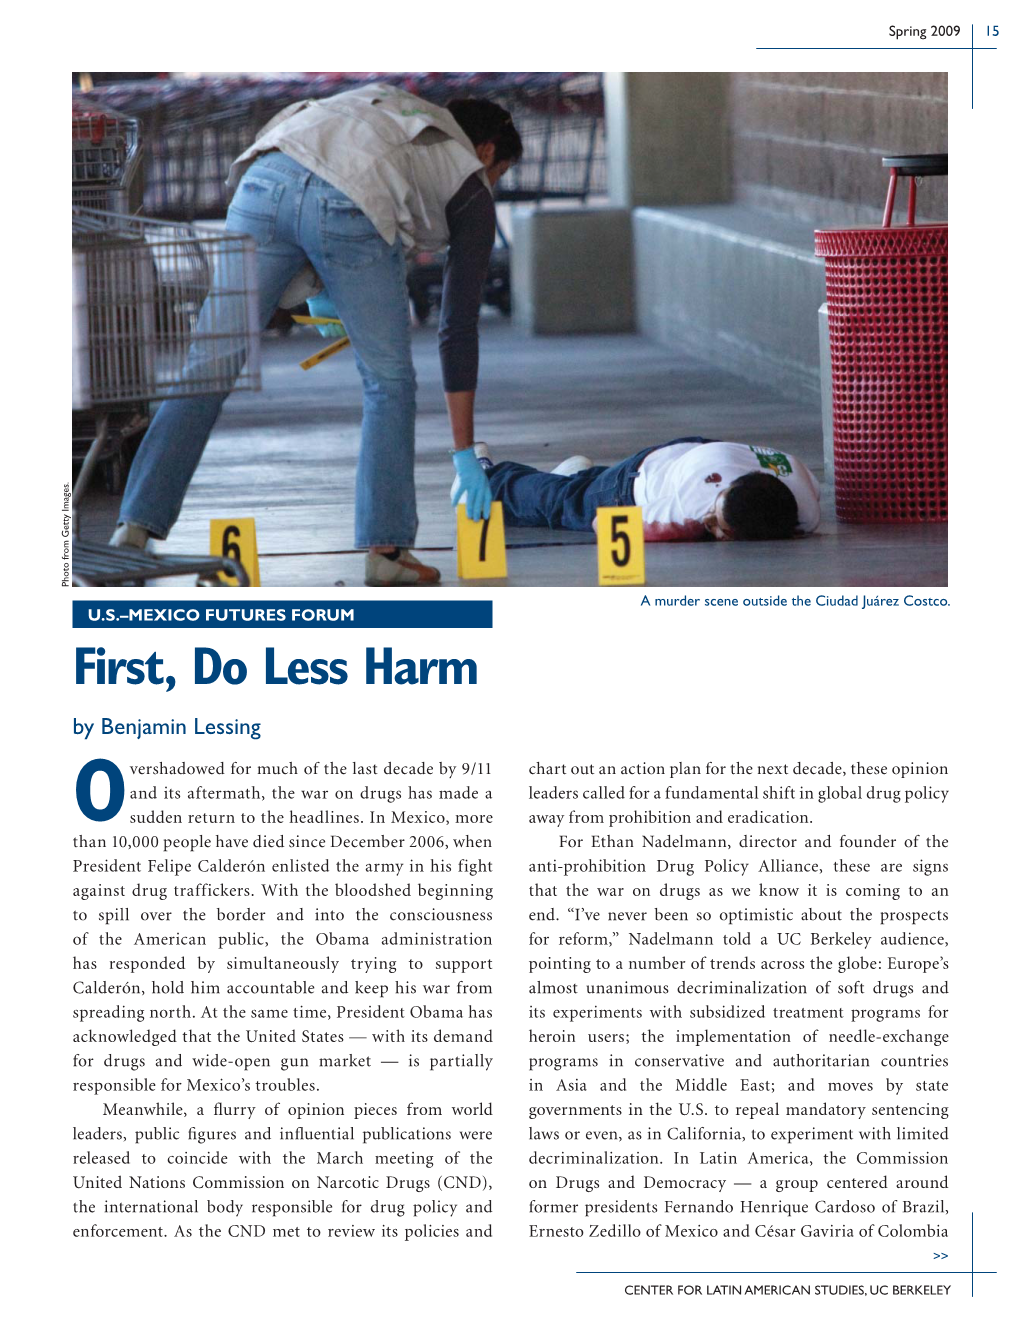 First, Do Less Harm by Benjamin Lessing